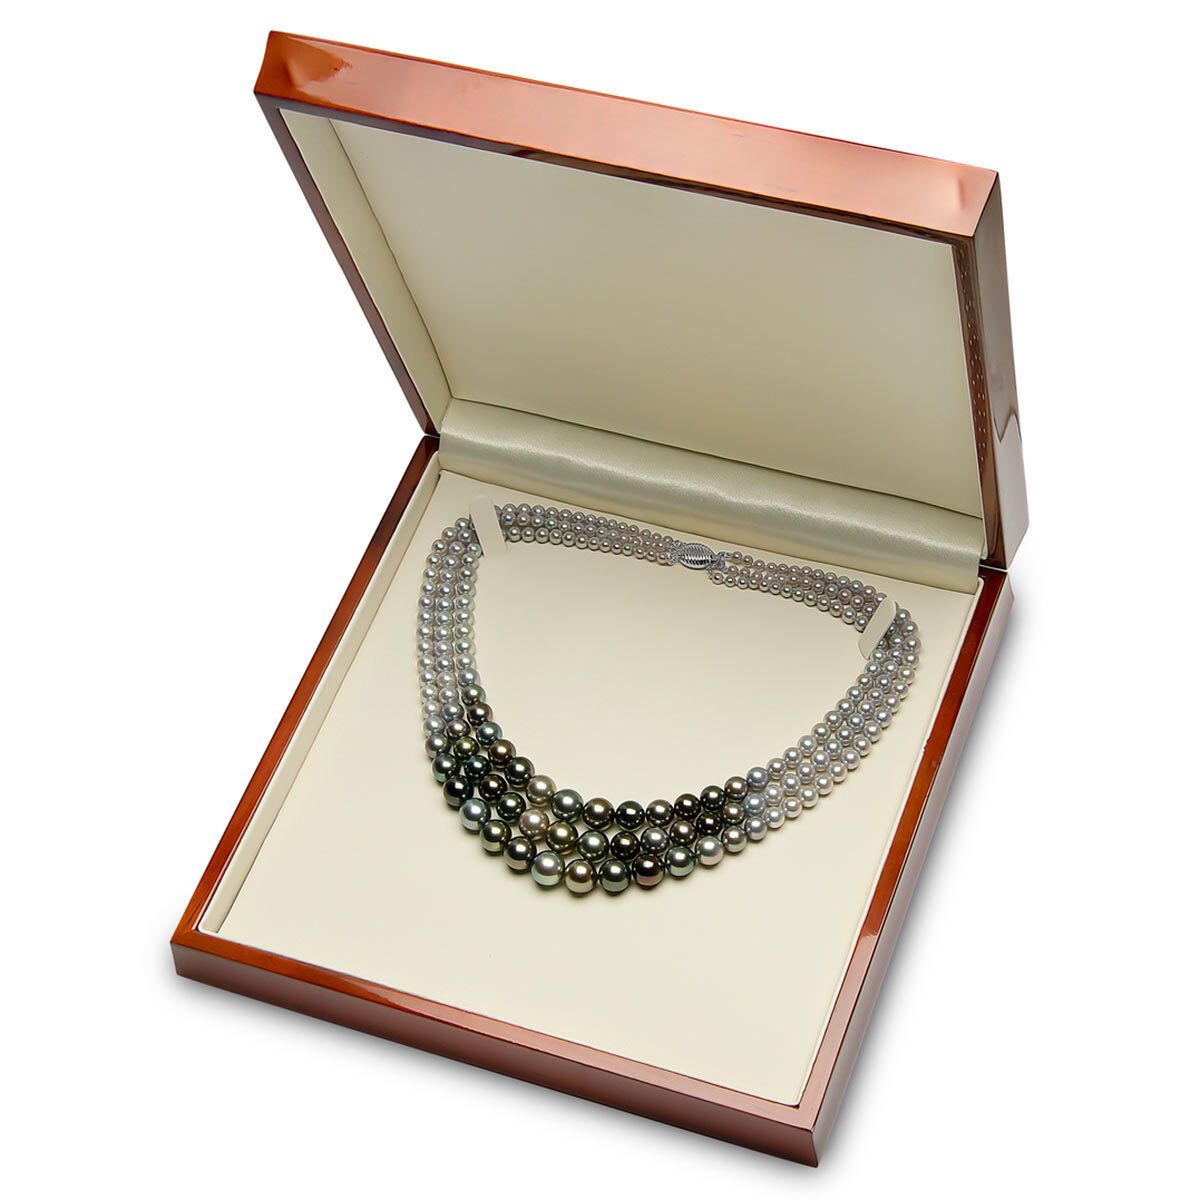 3-10mm Tahitian & Treated Akoya 3 Strand Graduated Pearl Necklace,18ct White Gold